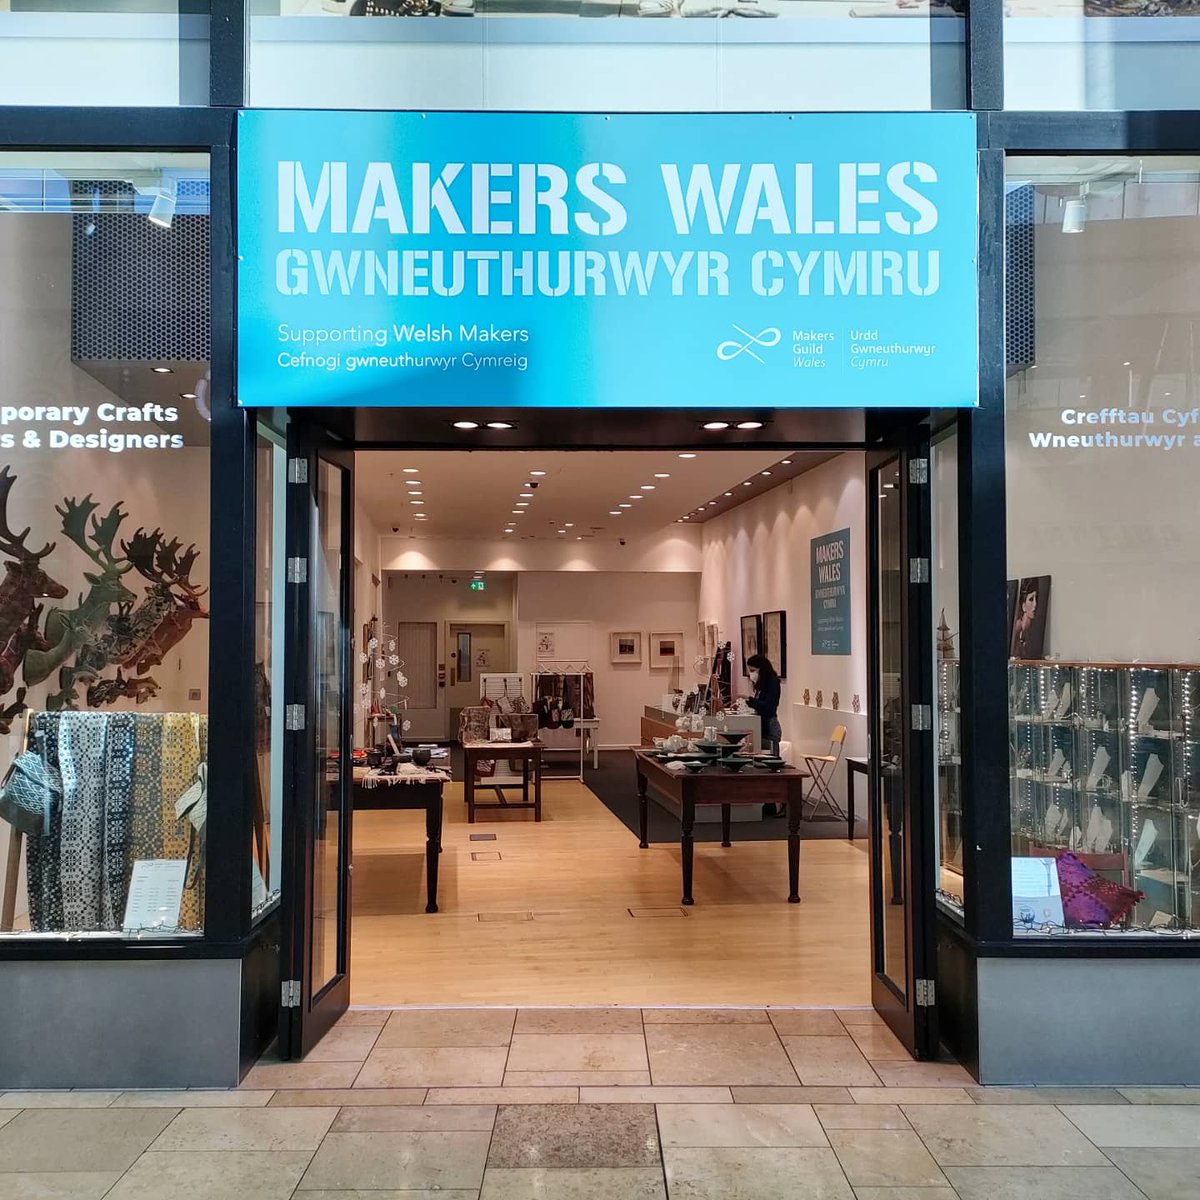 #makerswales
We're open in St. Davids 2, visit us to see a curated display of unique handmade Welsh craft by over 30 makers
Today you can meet textile artist @clairecawte learn about how she makes her unique eco print plant dye scarves
#buycraft
#madeinwales 
@StDavidsCardiff